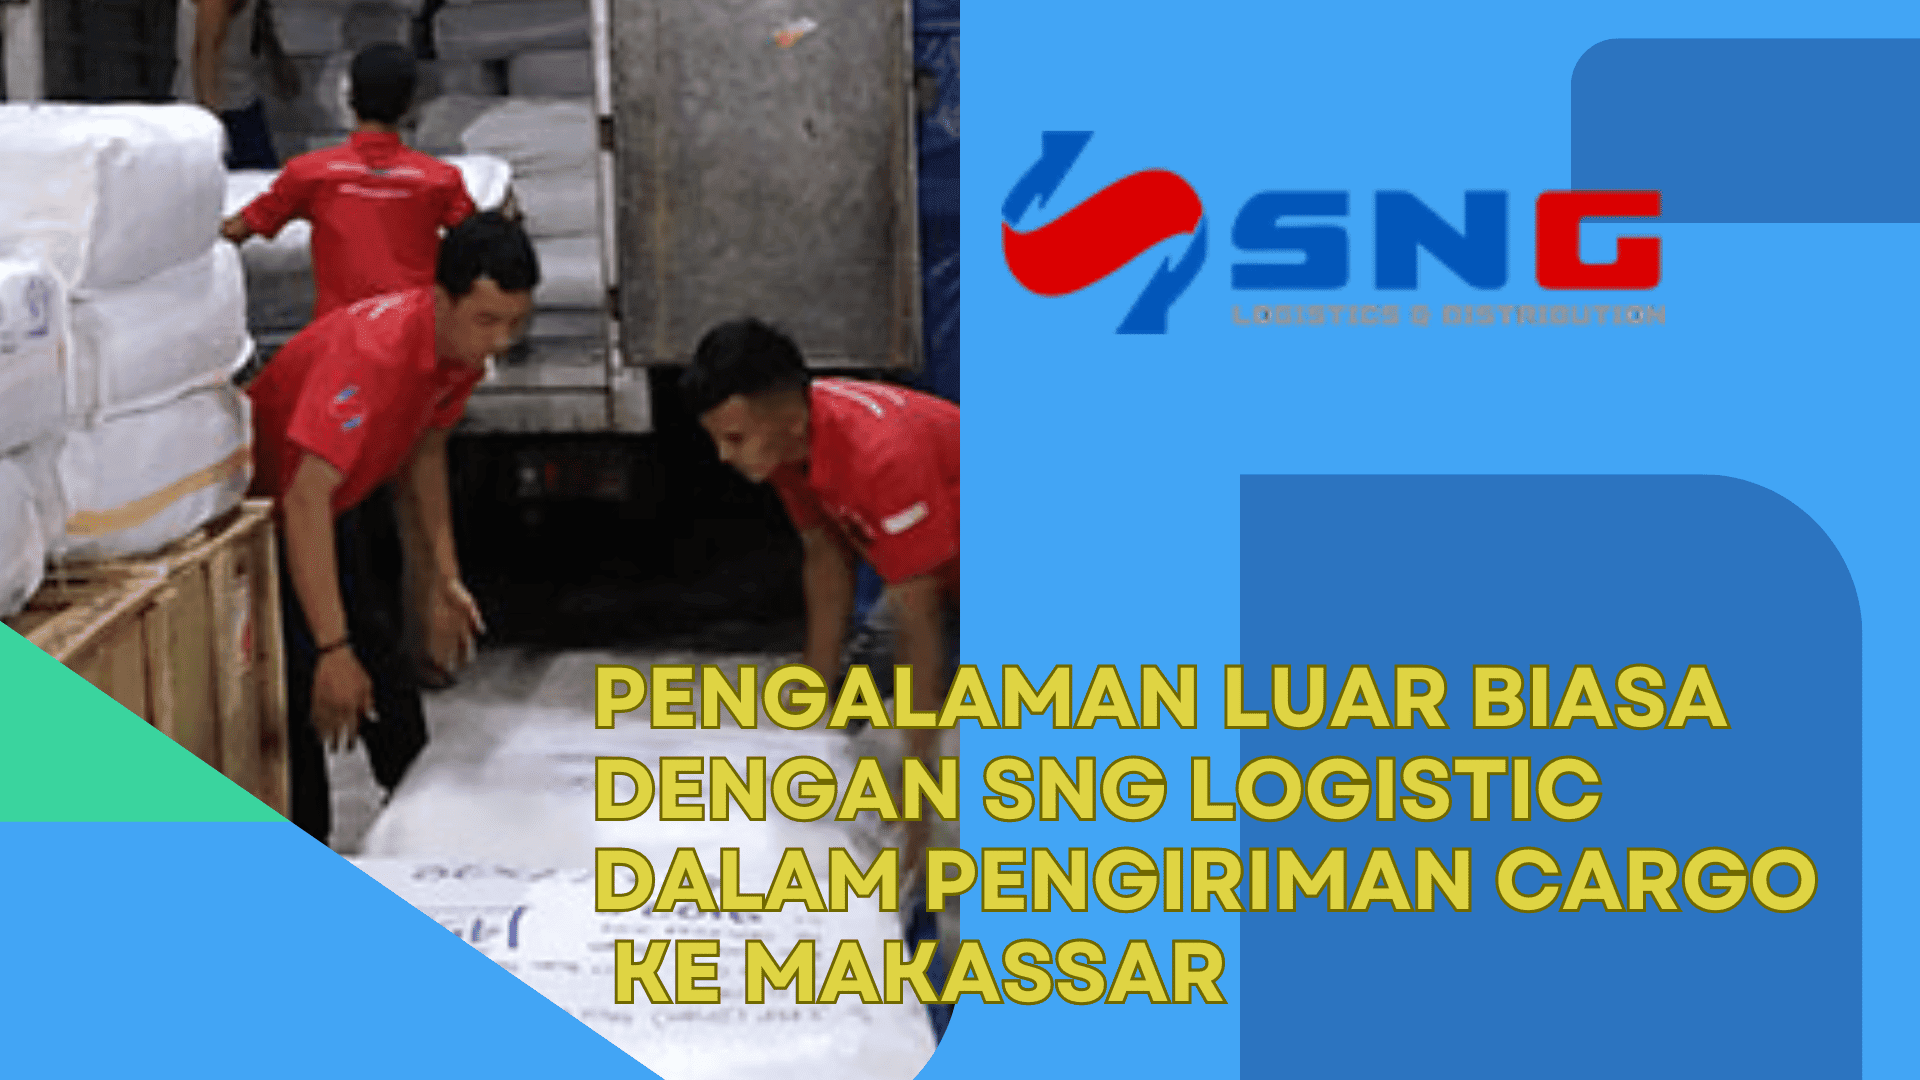 Sng-logistic